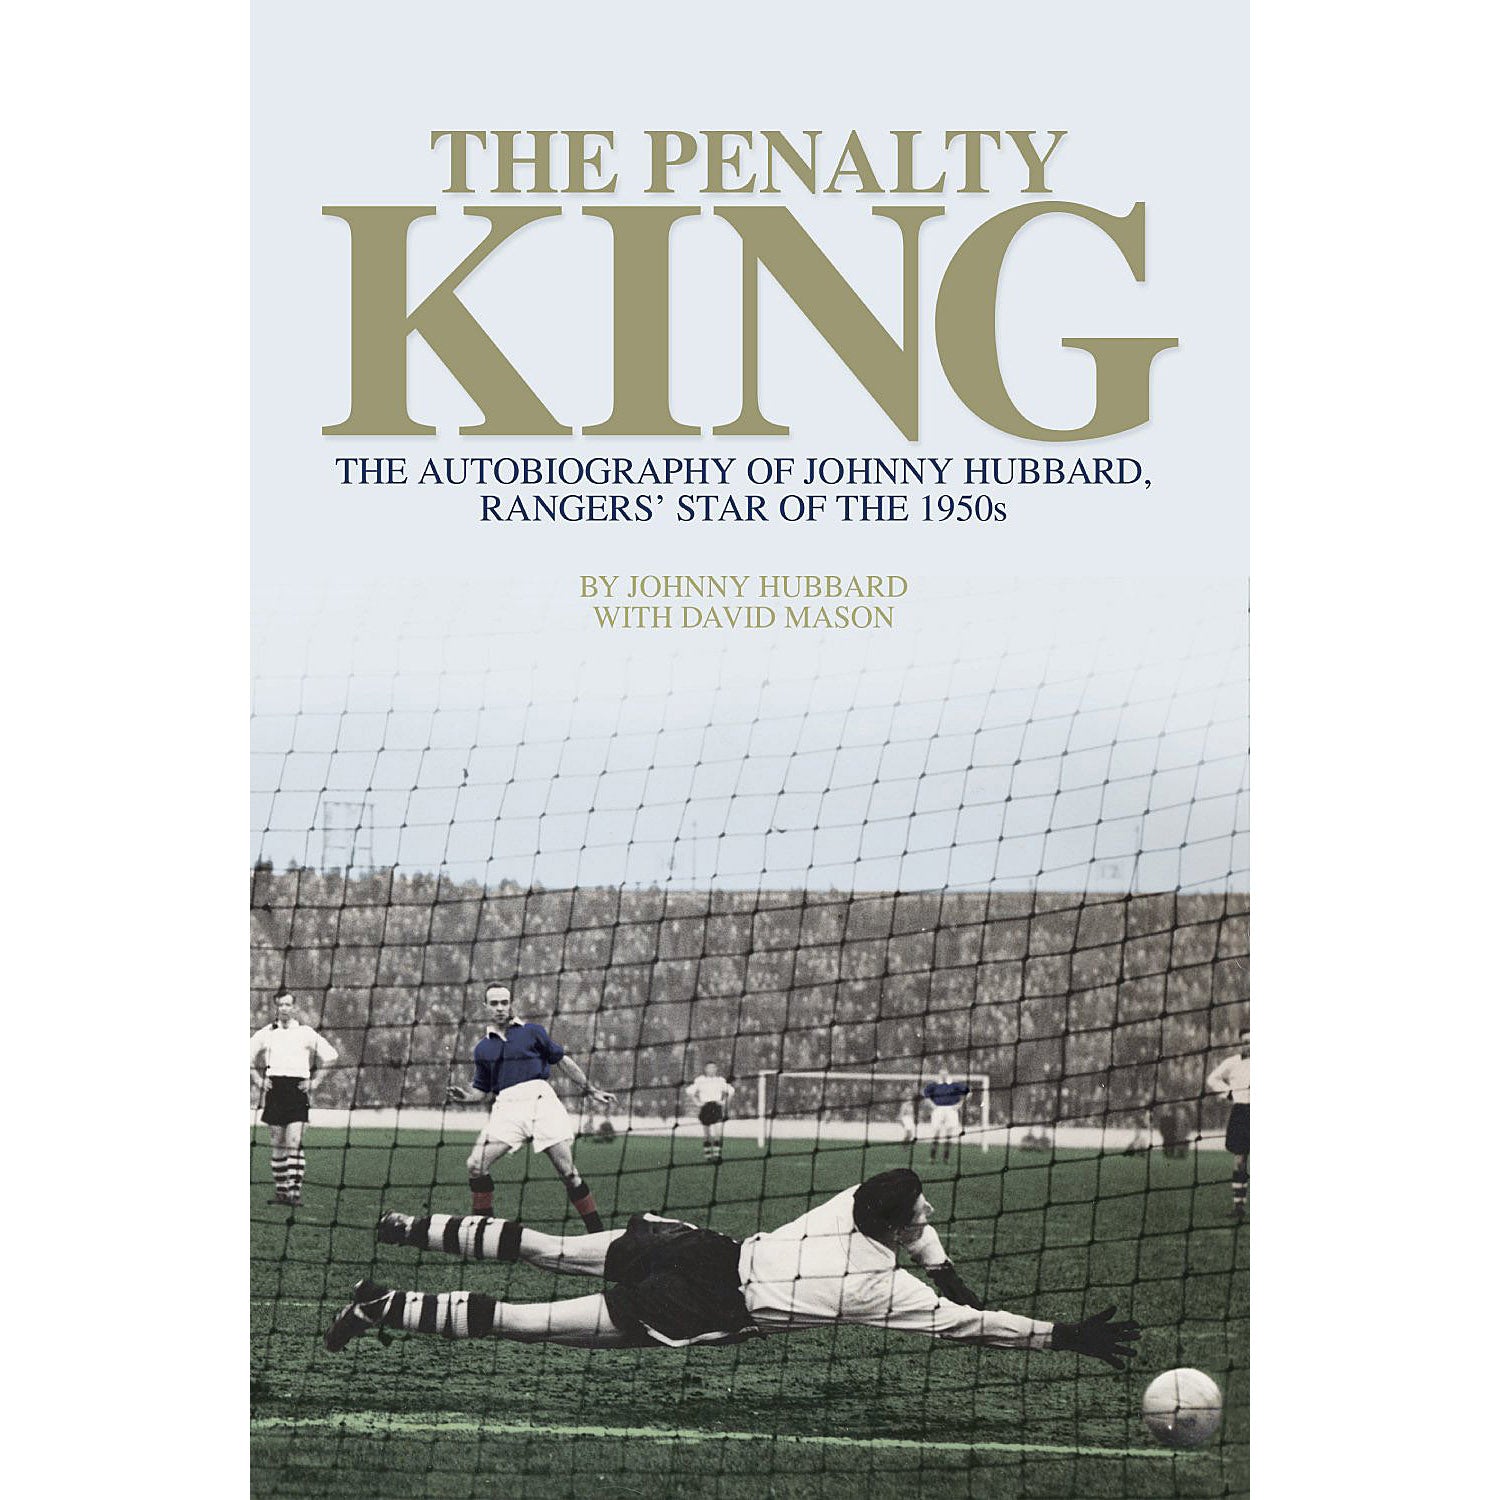 The Penalty King – The Autobiography of Johnny Hubbard, Rangers' Star of the 1950s